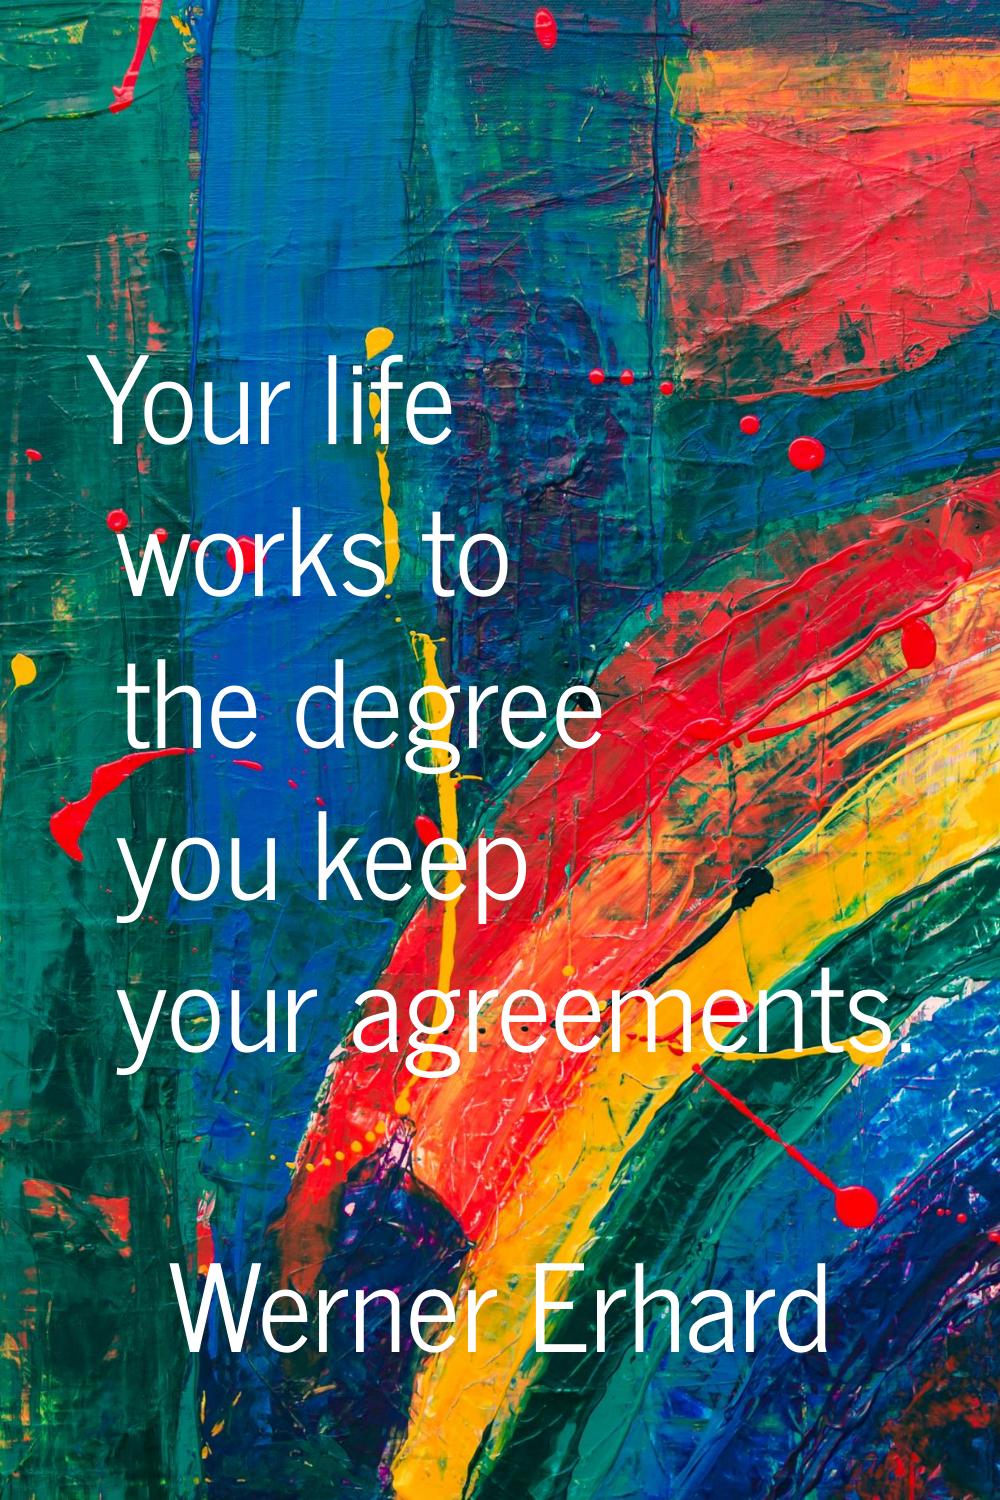 Your life works to the degree you keep your agreements.